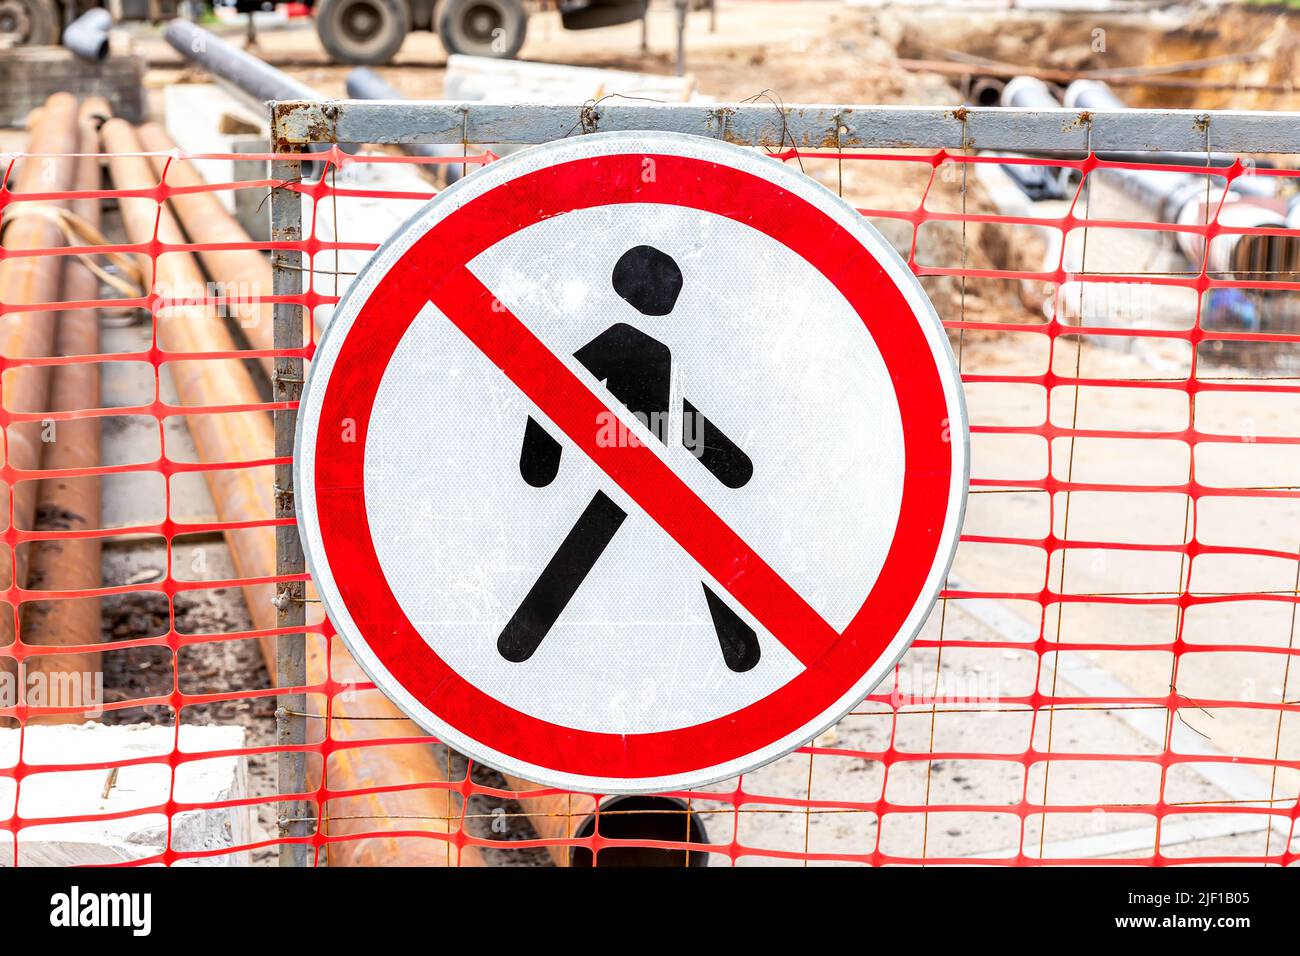 Road sign Passage is prohibited. The passage is closed. Construction work in progress Stock Photo